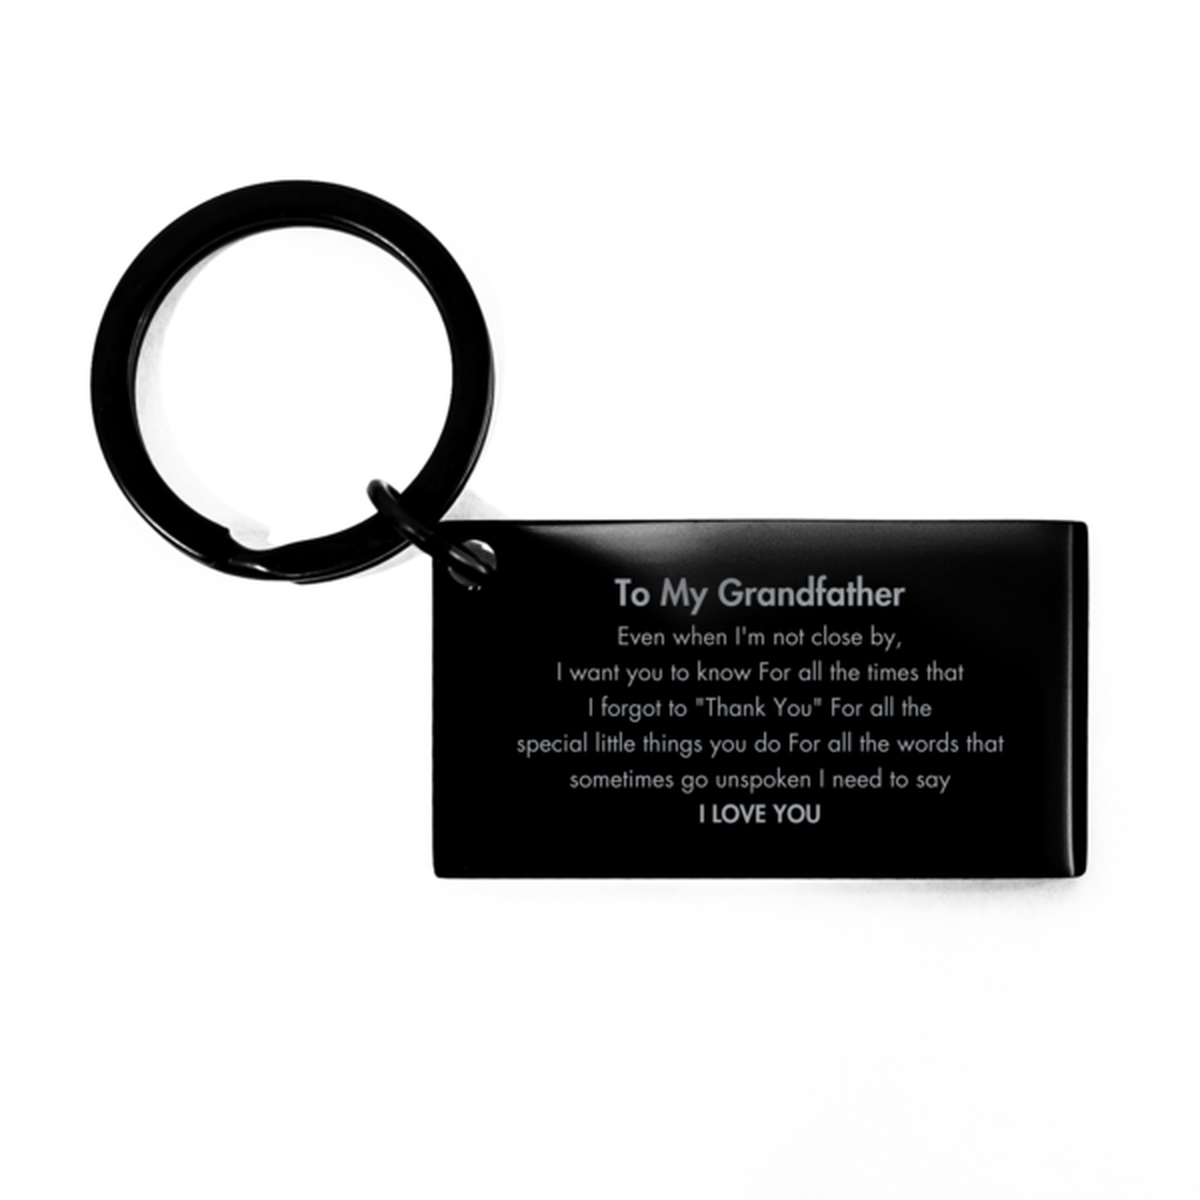 Thank You Gifts for Grandfather, Keepsake Keychain Gifts for Grandfather Birthday Mother's day Father's Day Grandfather For all the words That sometimes go unspoken I need to say I LOVE YOU